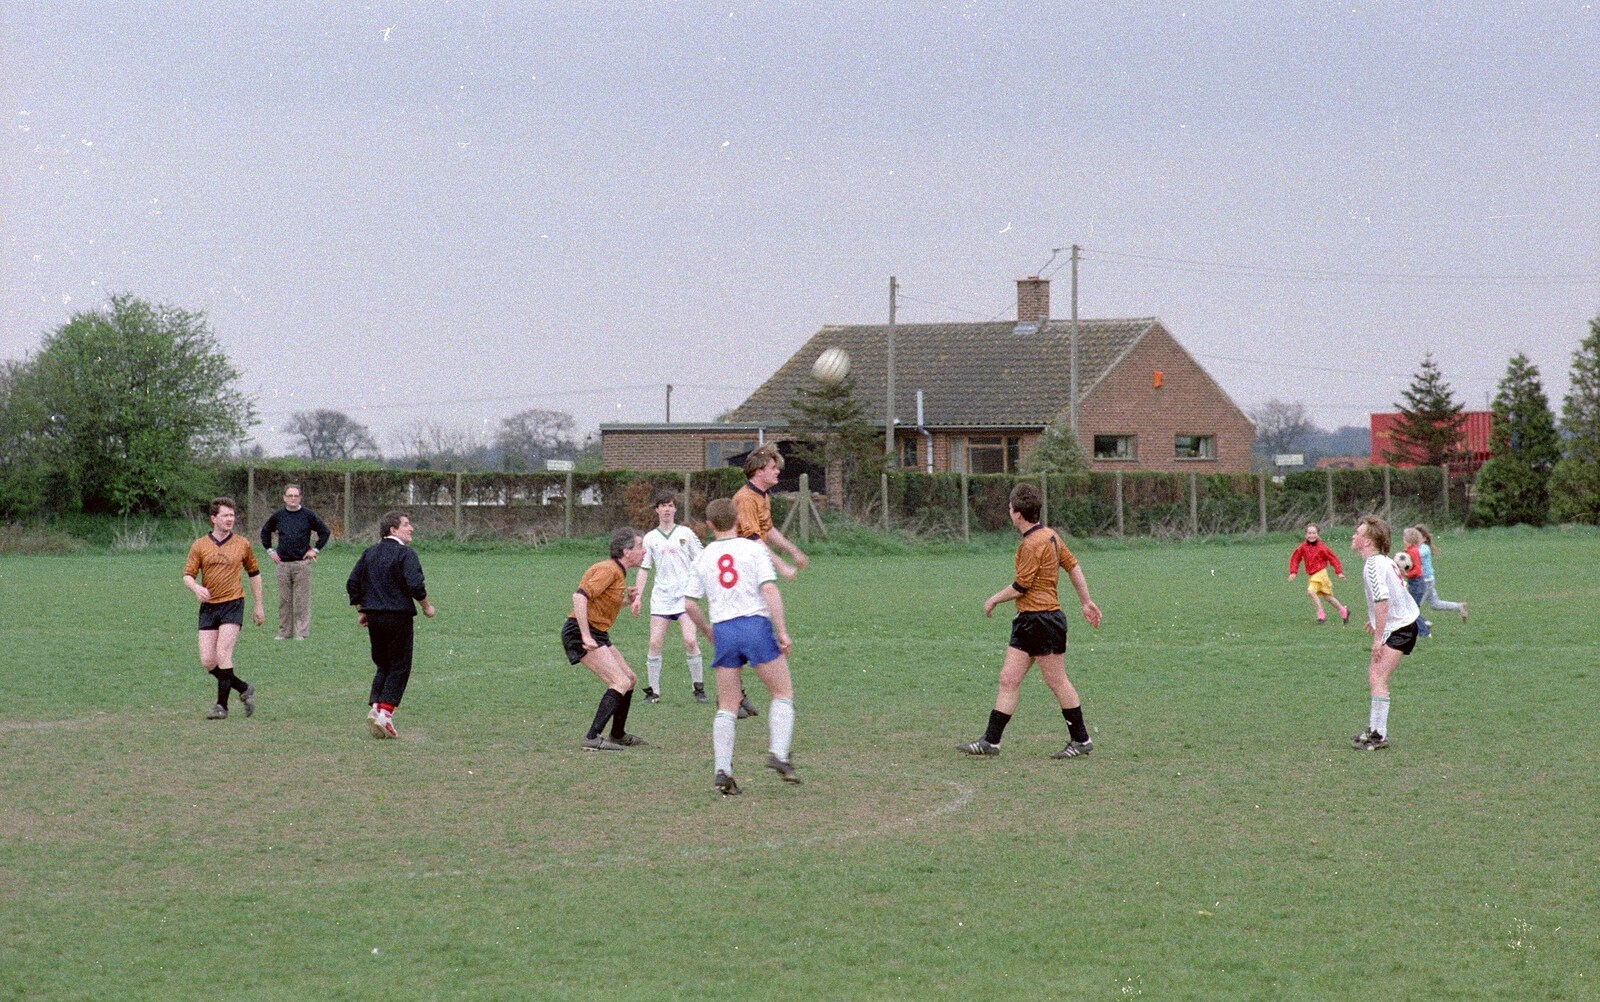 Simon 'Burton' Berry comes in for a header from Soman-Wherry Footie Action, Norfolk - 25th February 1988